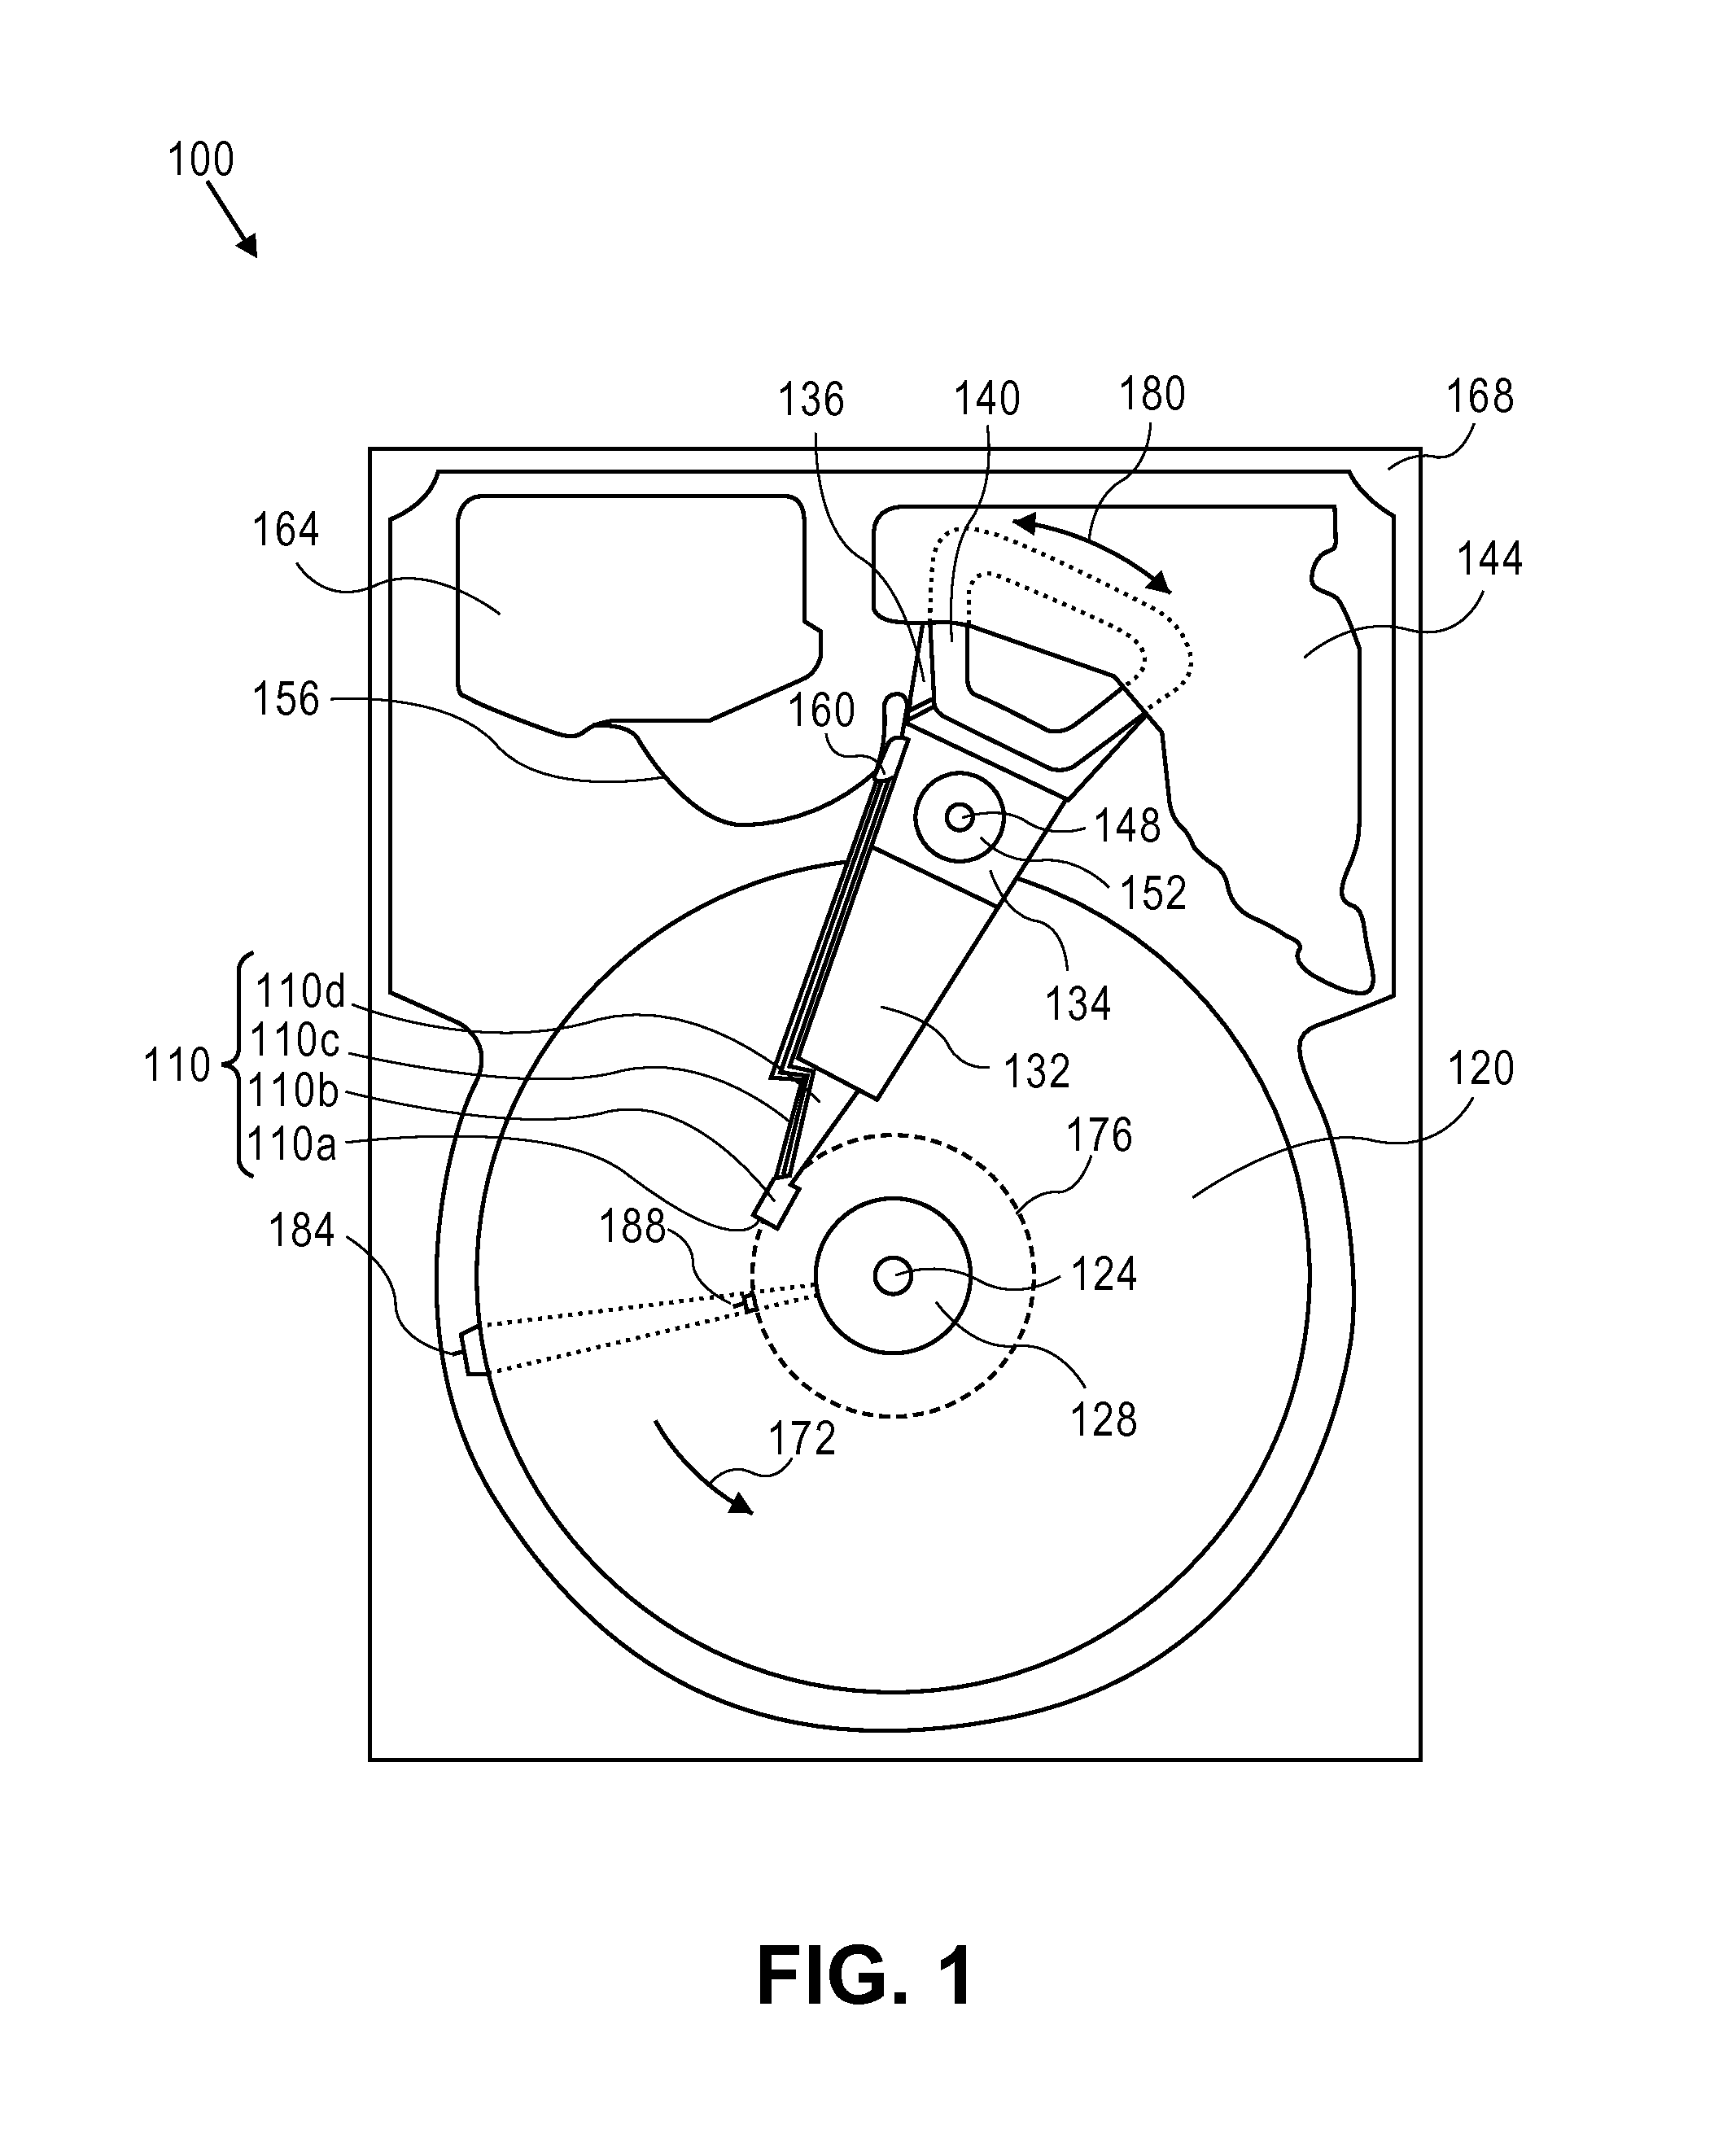 Microwave-assisted magnetic recording head with asymmetric side gap for shingled magnetic recording